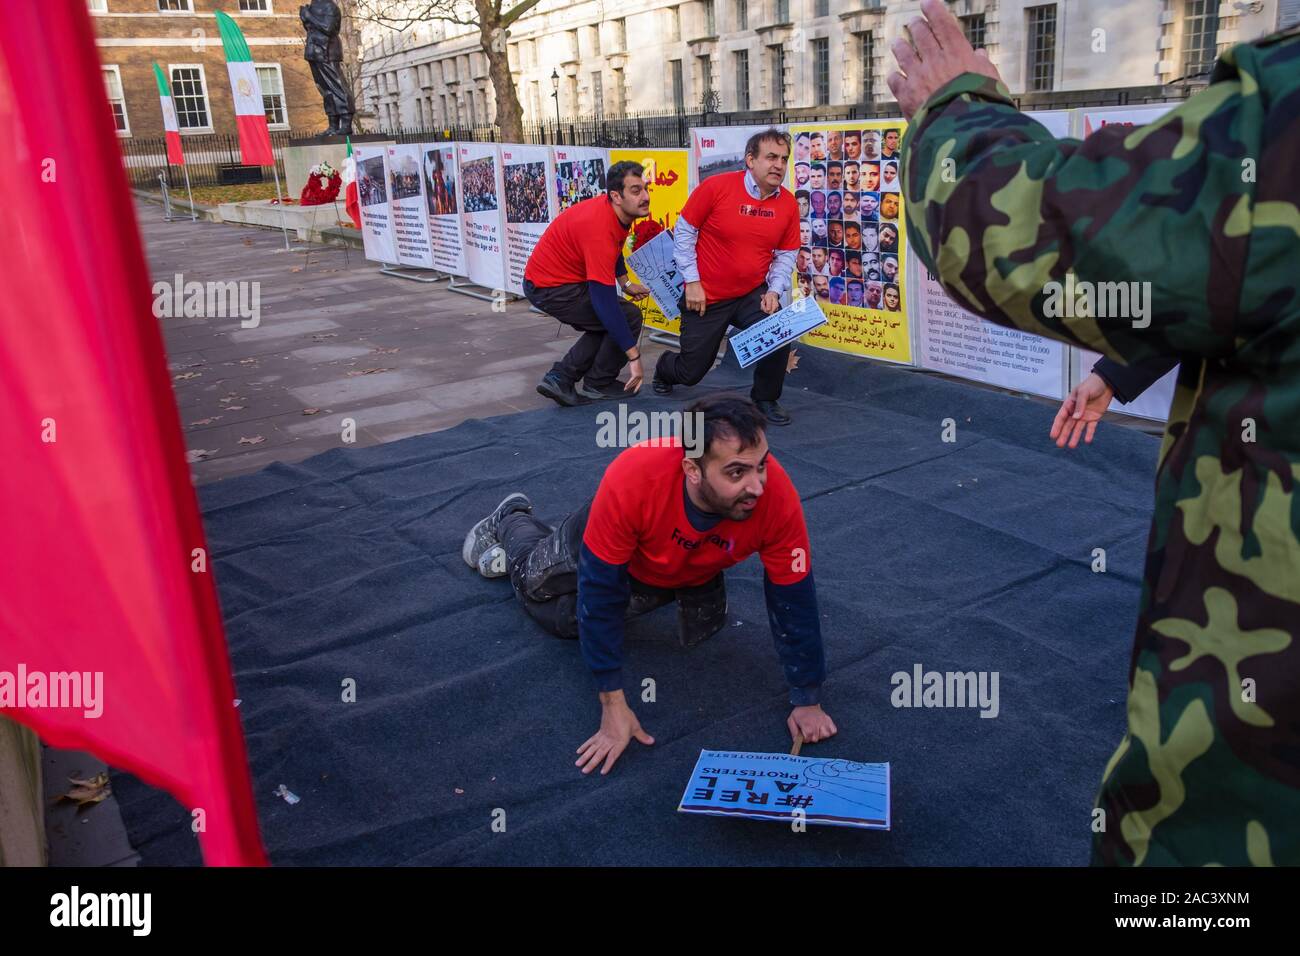 London, UK. 30th Nov, 2019. Actors re-enact the shooting of protesters by Iranian secuirty forces at a rally by Anglo-Iranian Communities in the UK and supporters of the People's Mujahedin of Iran's National Council of Resistance of Iran at Downing St in support of protests in Iran against the clerical regime. Over 450 protesters have been killed in the brutal suppression of the Iran protests by security forces, with 4000 injured and thousands arrested. Credit: Peter Marshall/Alamy Live News Stock Photo